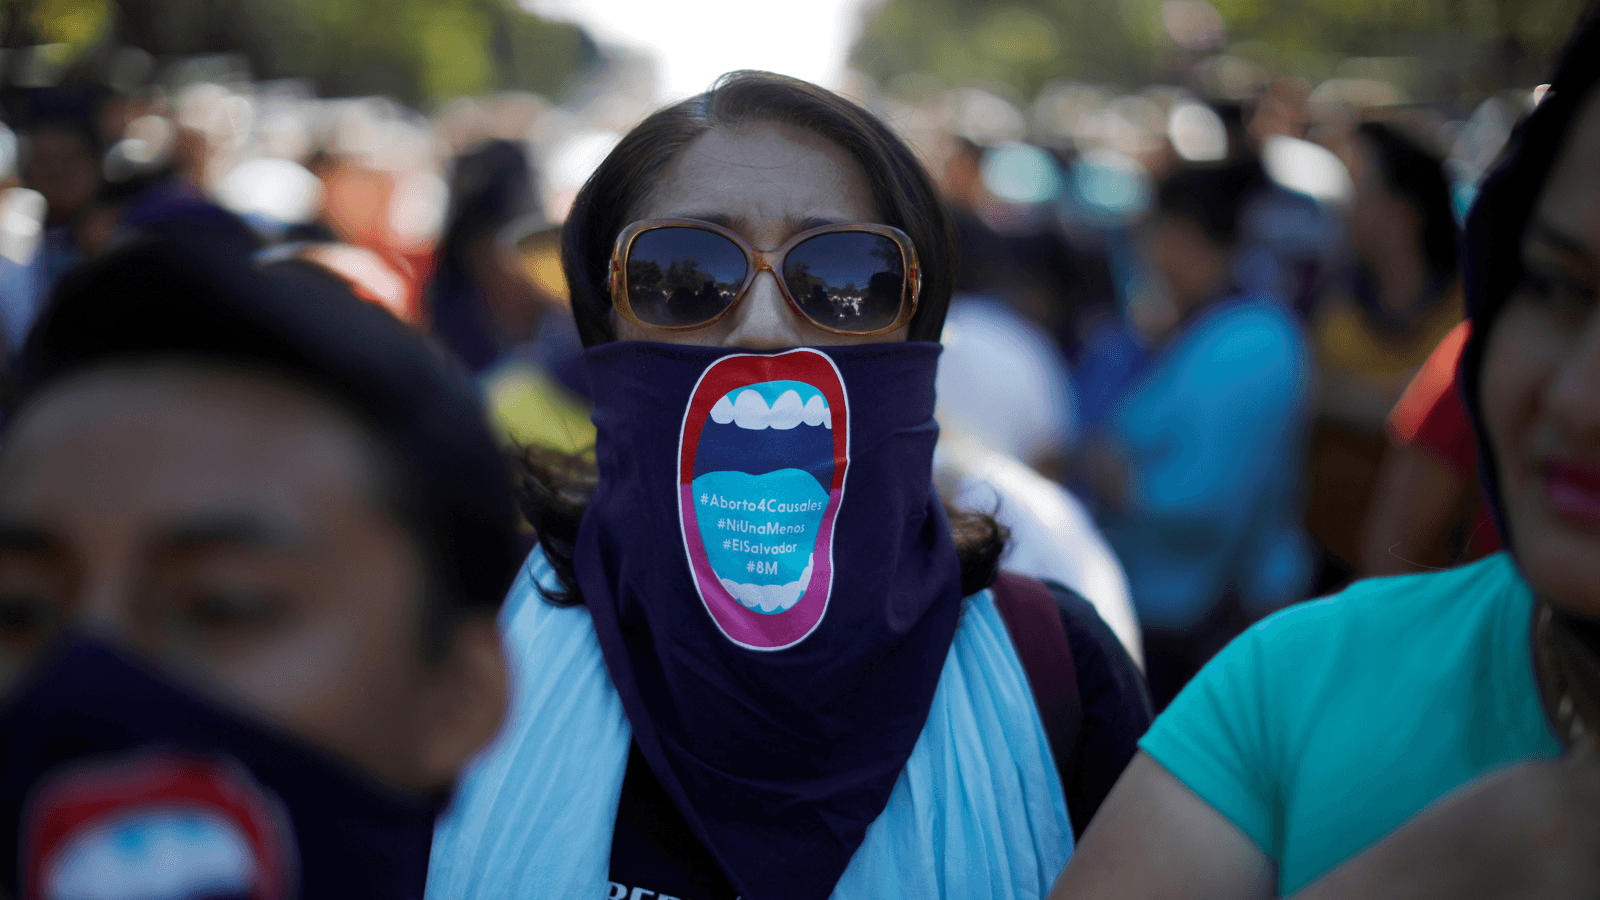 Activists participate in a march to call for an end to violence against women during International Women's Day in San Salvador, El Salvador, March 8, 2018.